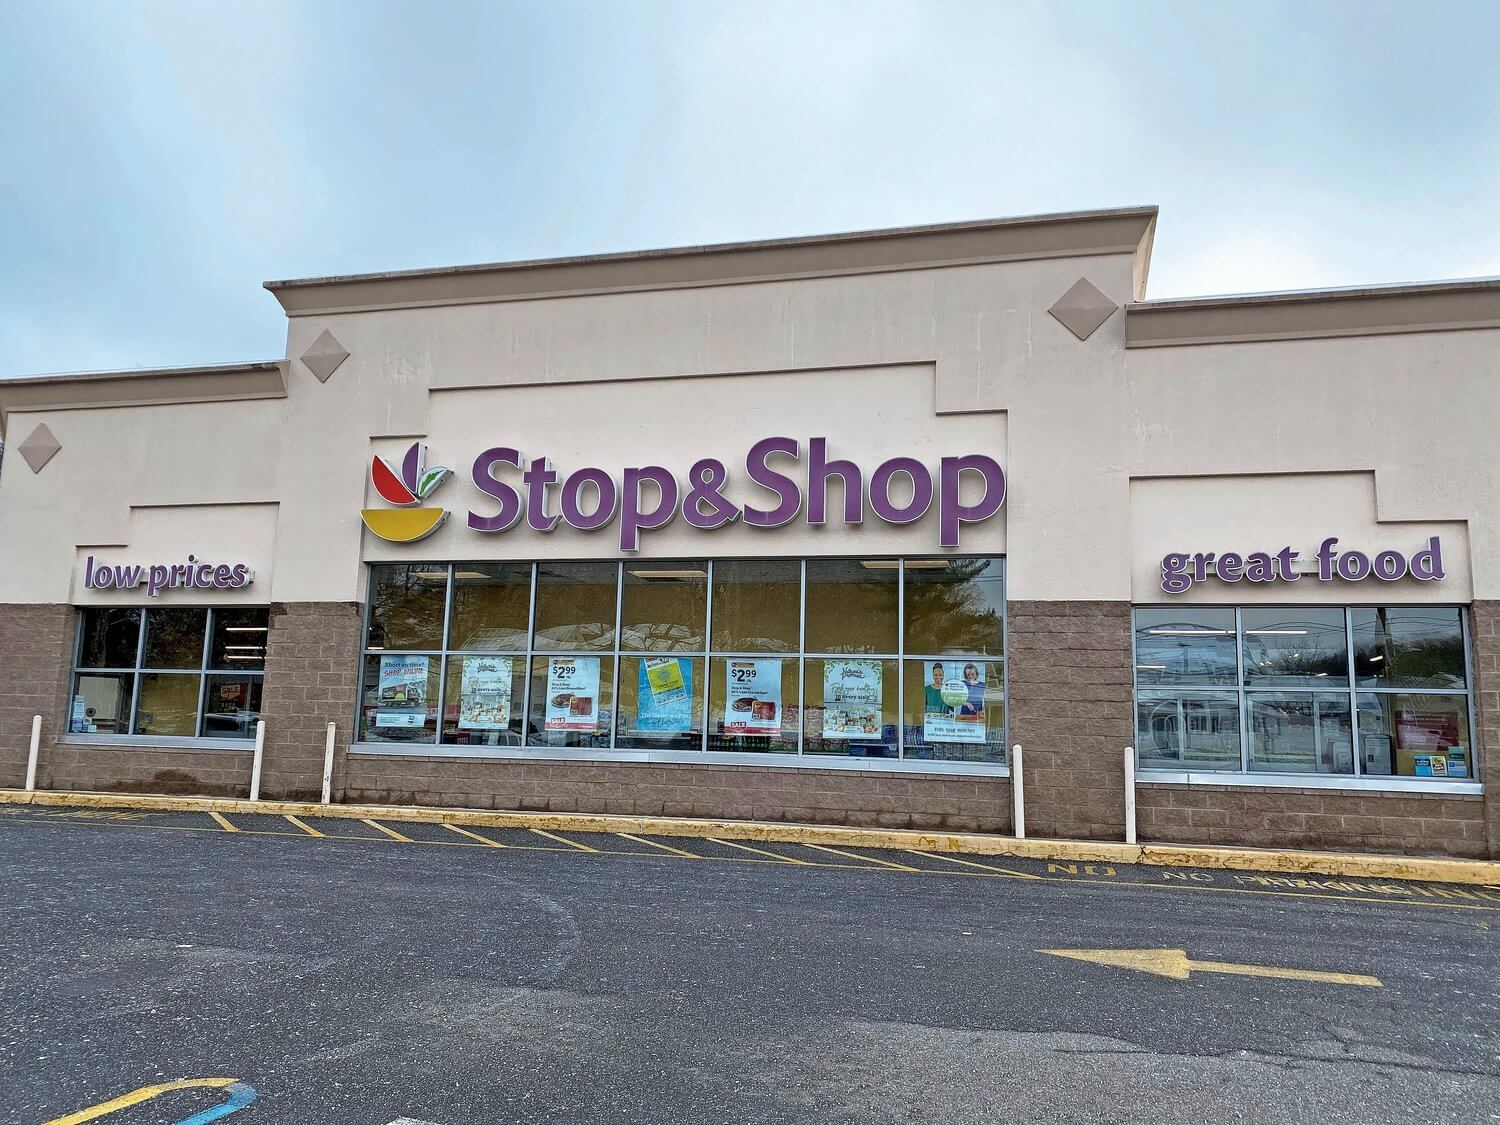 take stop and shop survey offline